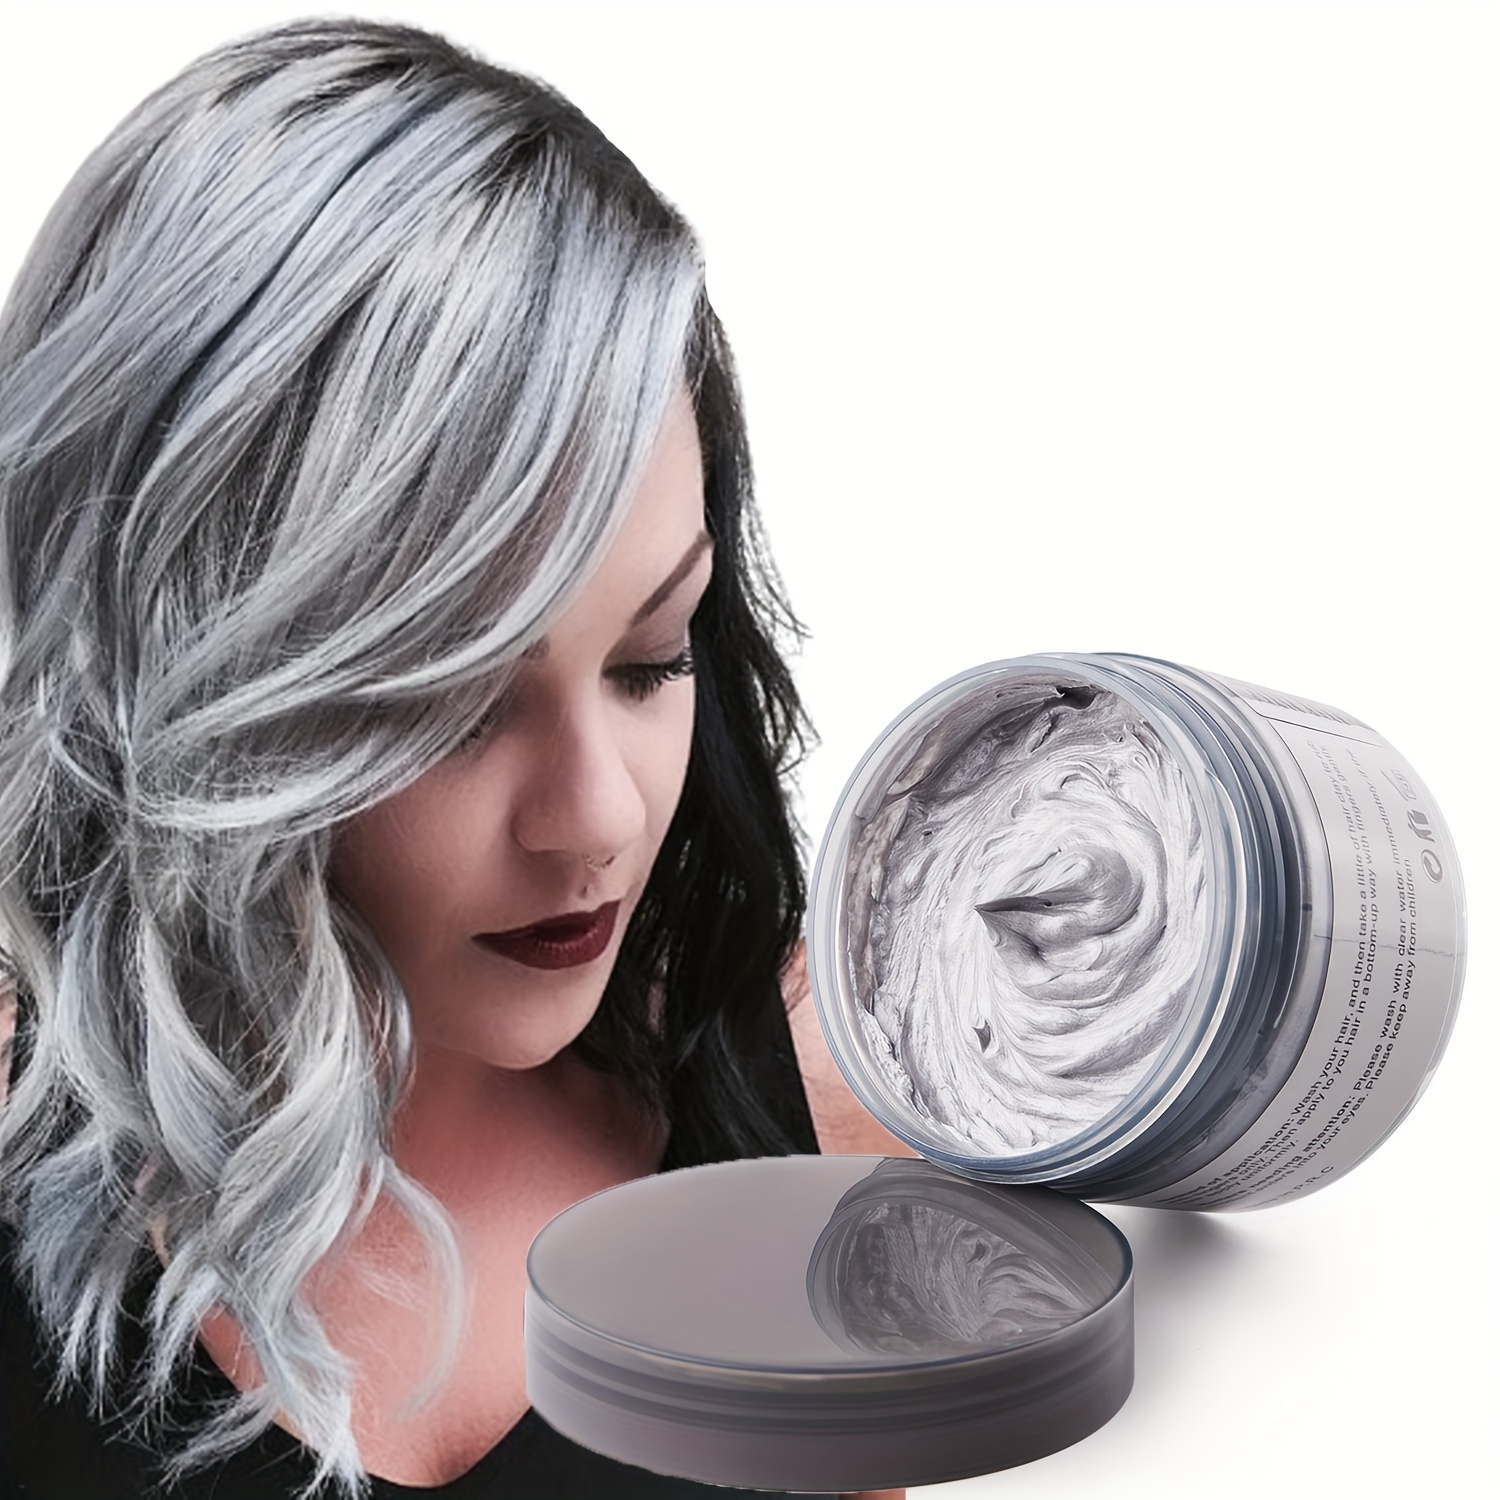 6 Colors Temporary Hair Dye Wax - 6 in 1 White Sliver Blue Purple Red Gold - Natural Matte Hairstyle Fashion DIY Hair for Party, Cosplay, Other